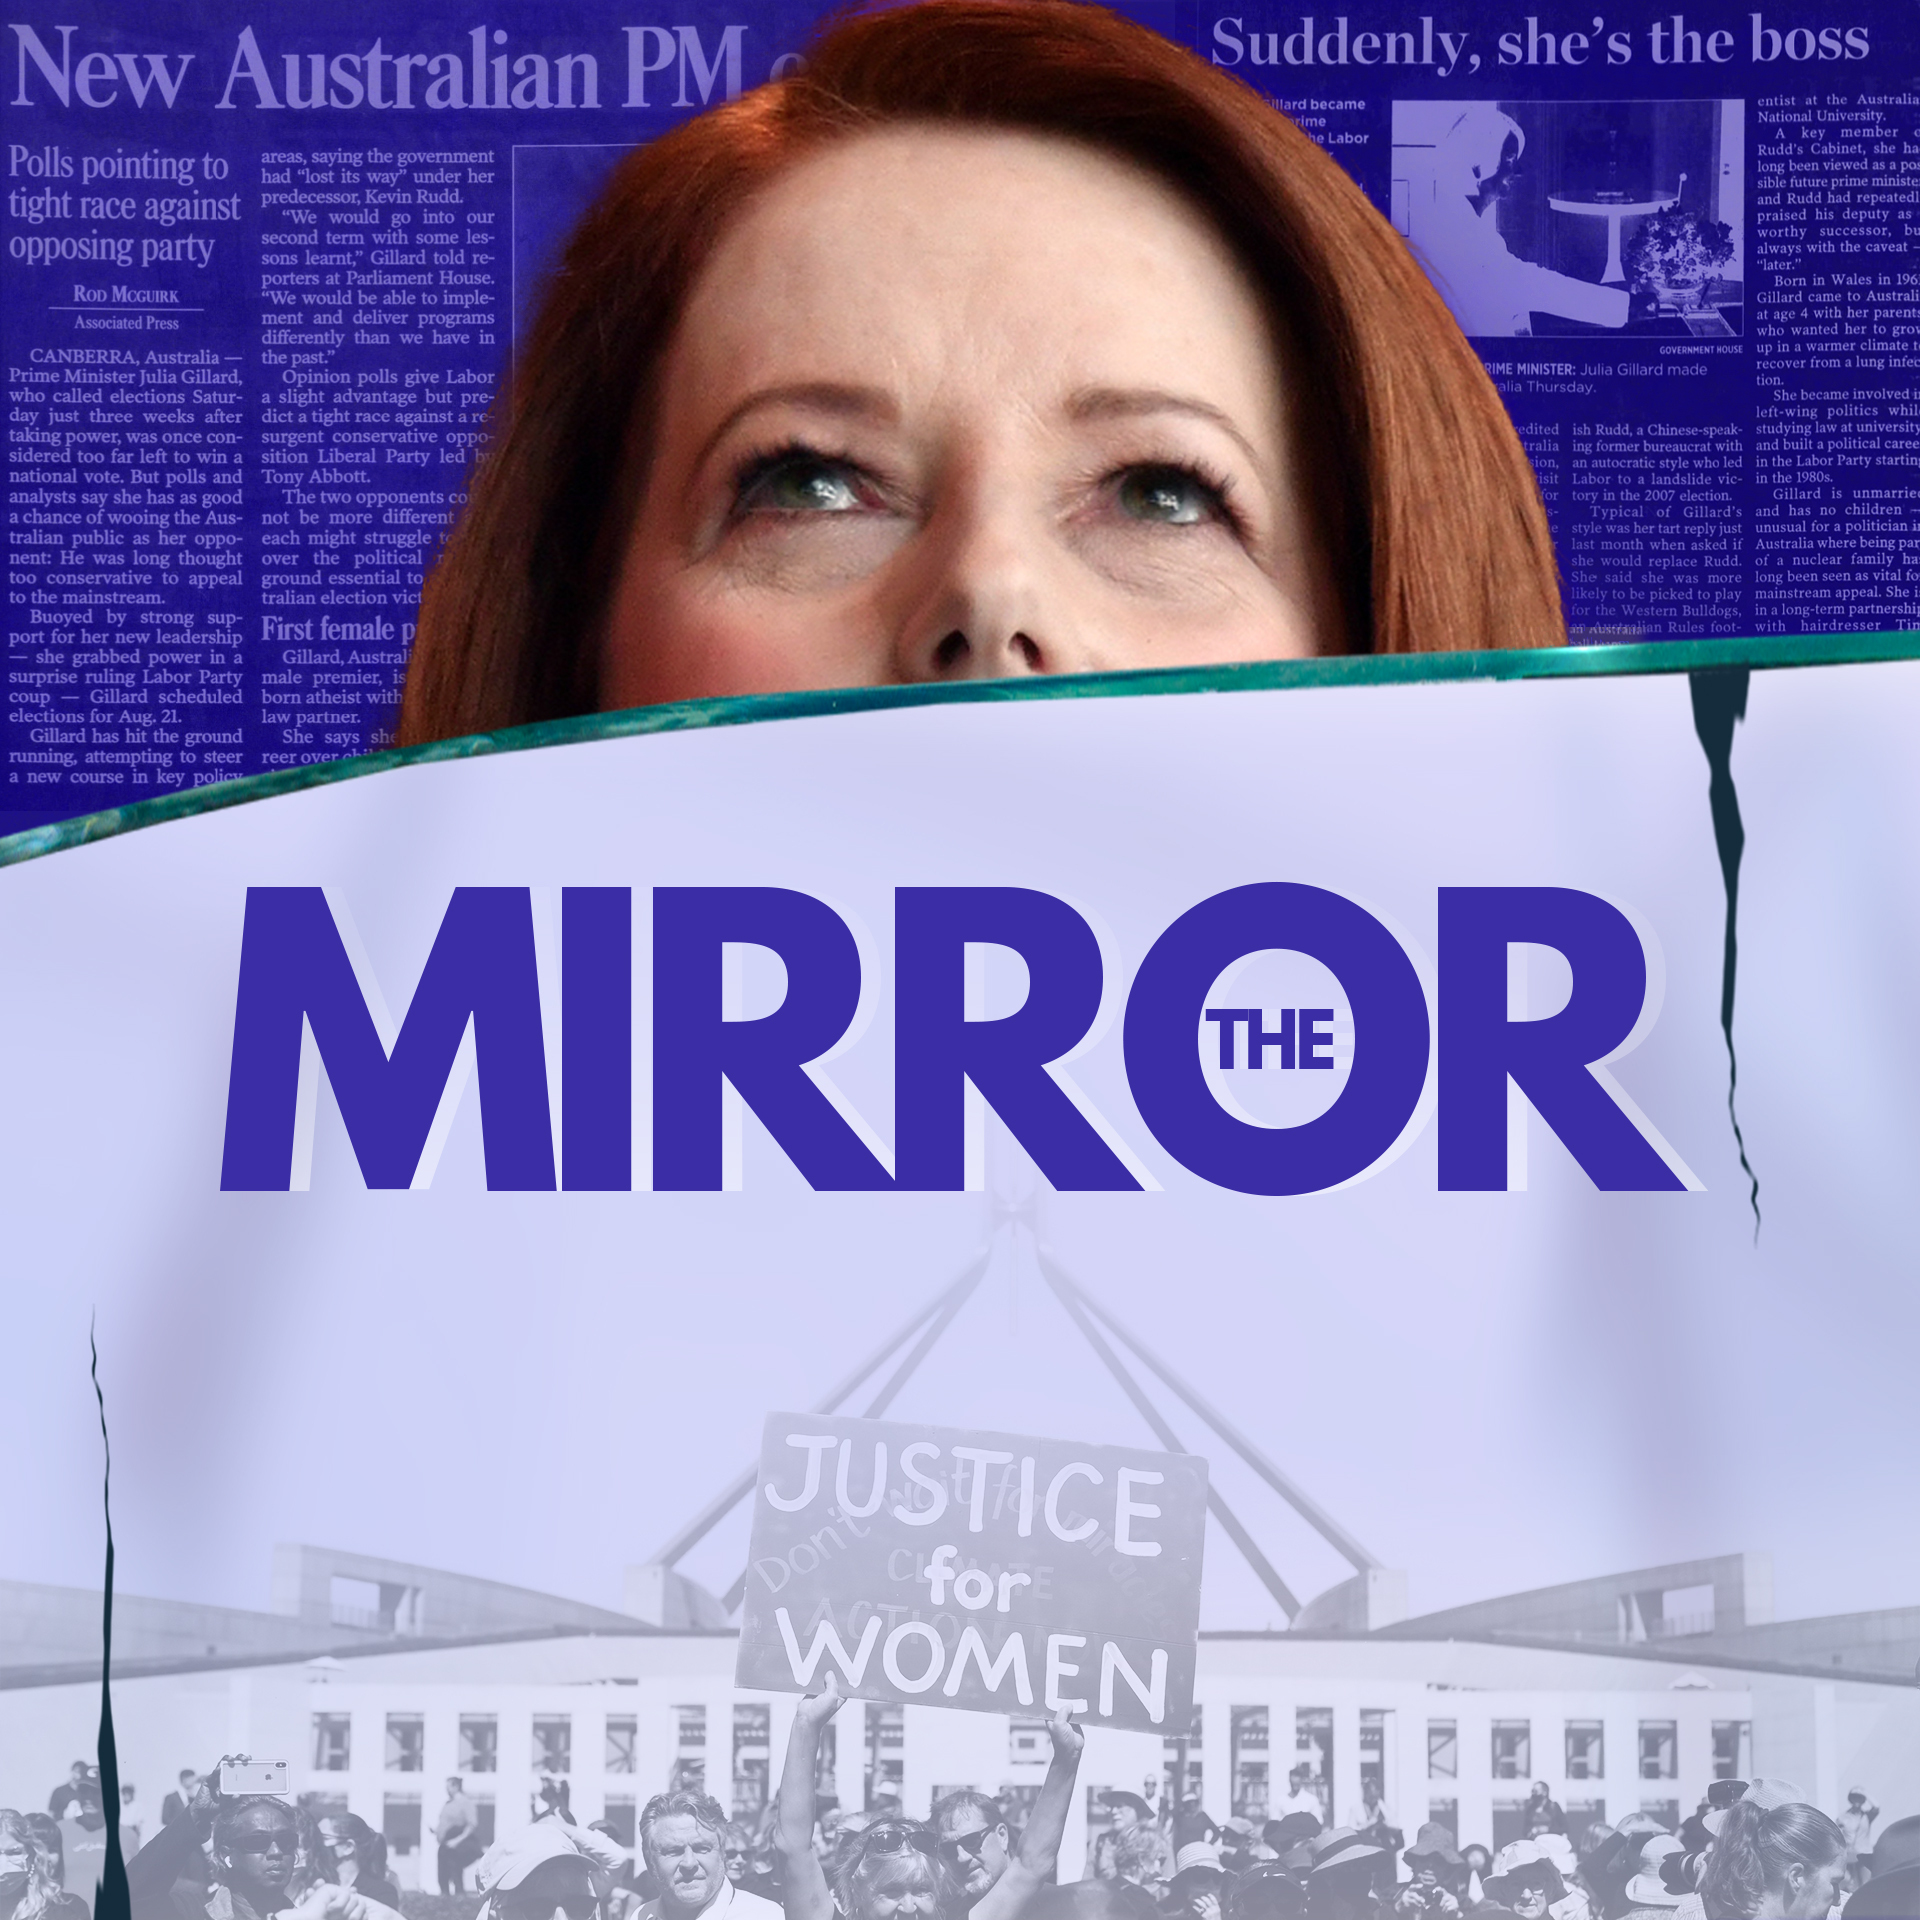 Introducing: The Mirror